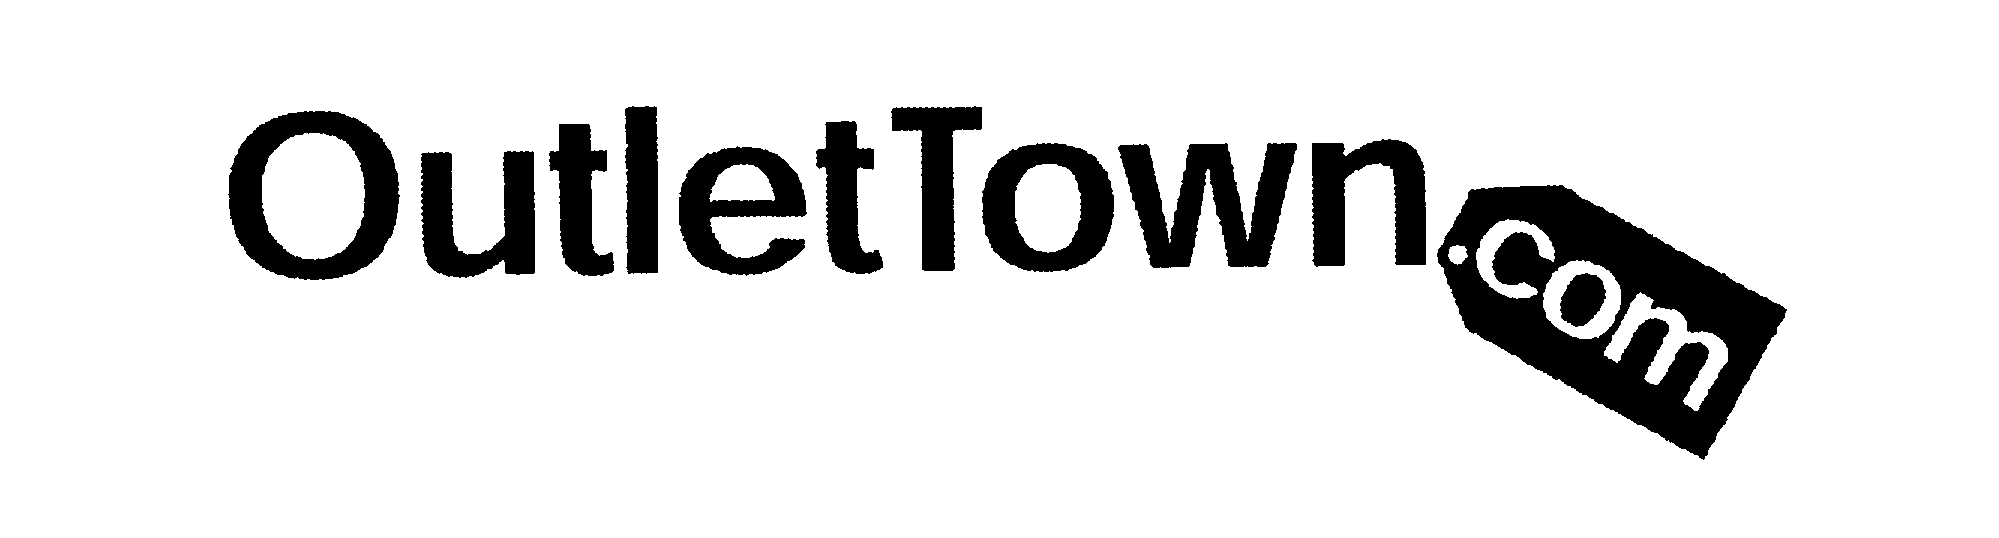  OUTLETTOWN.COM